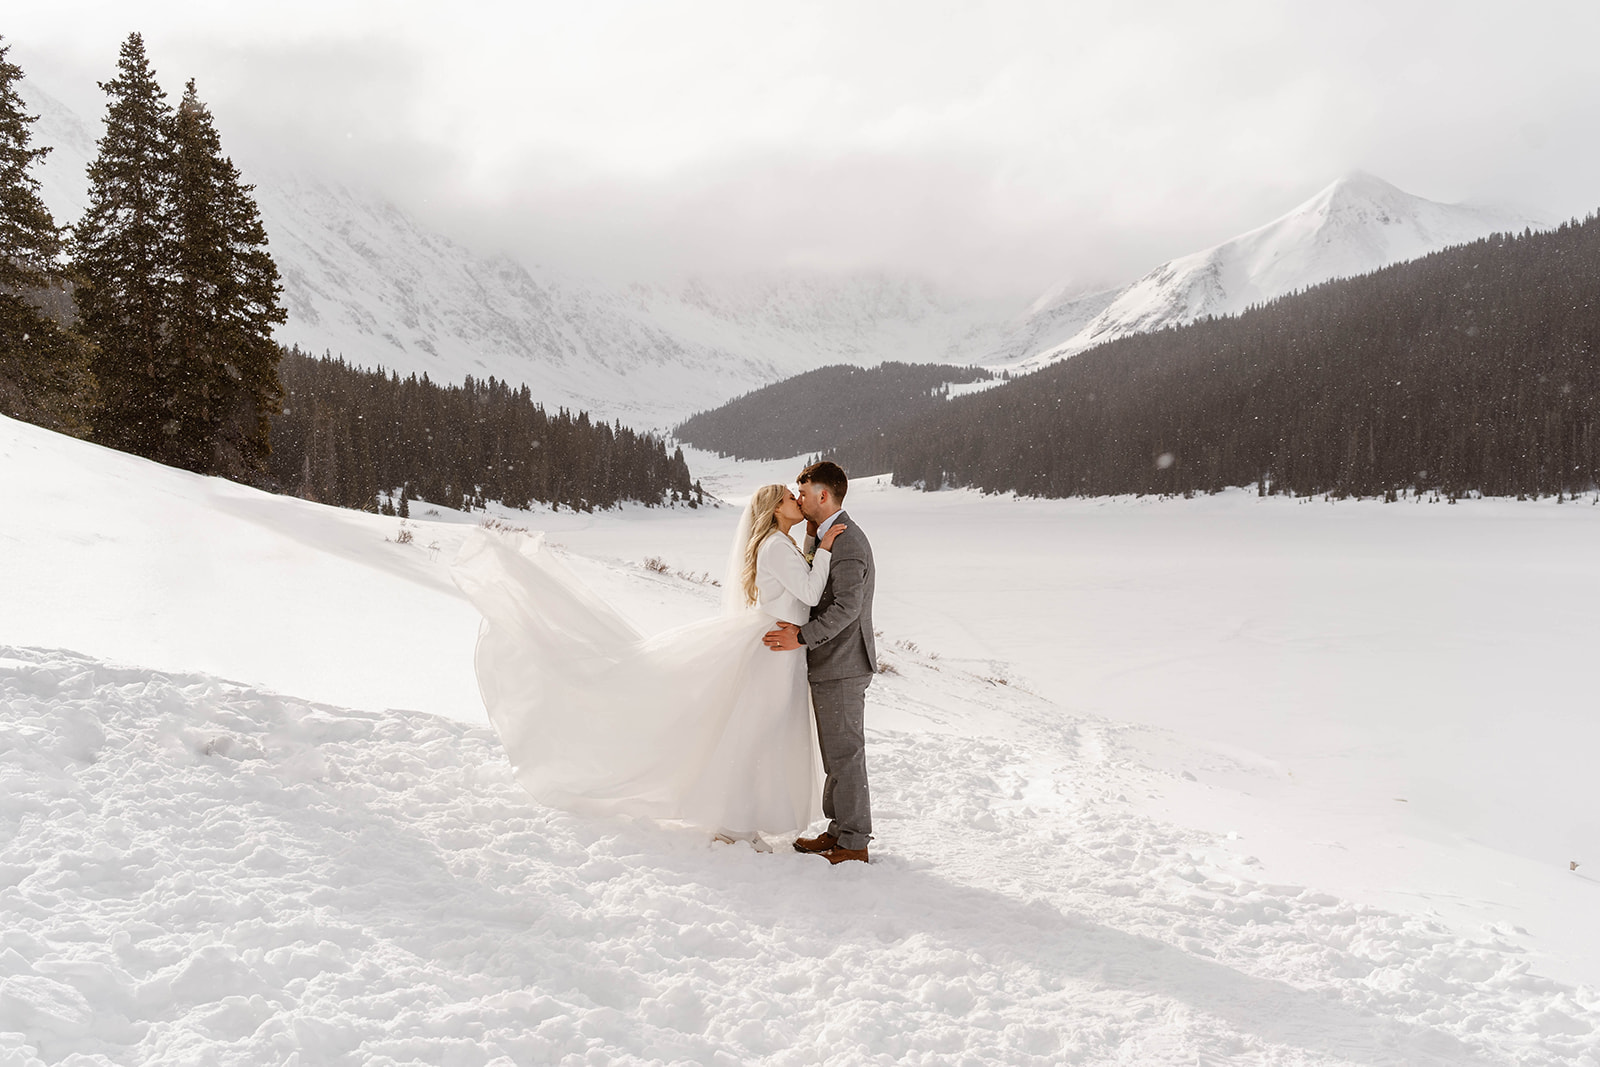 A bride and groom hold each other close among the white, snowy blanket of a Breckenridge Spring day at their Breckenridge Ski Resort wedding.